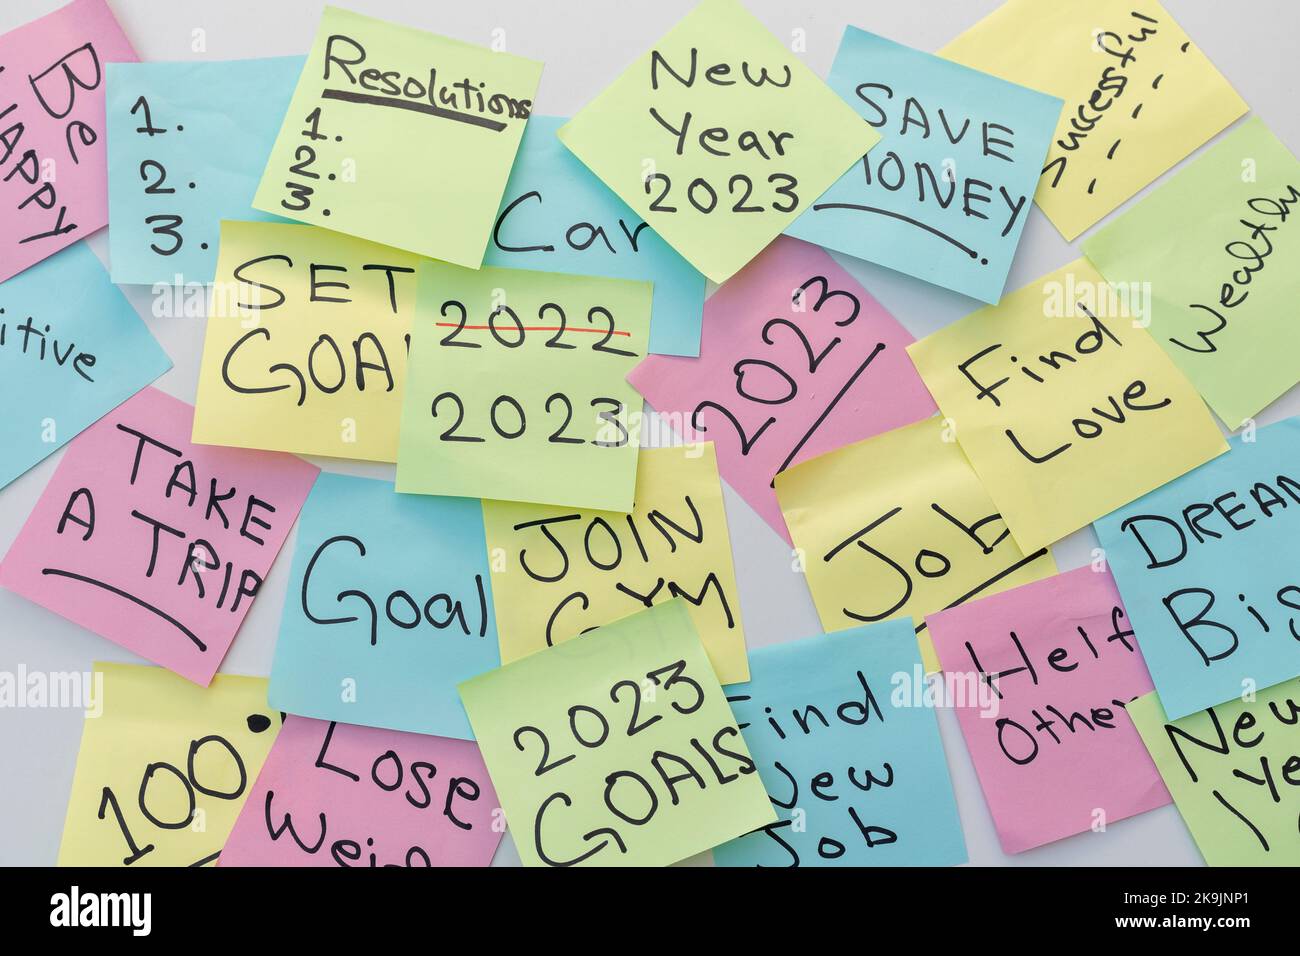 New year 2023 goals and resolutions written on a colorful sticky notes Stock Photo